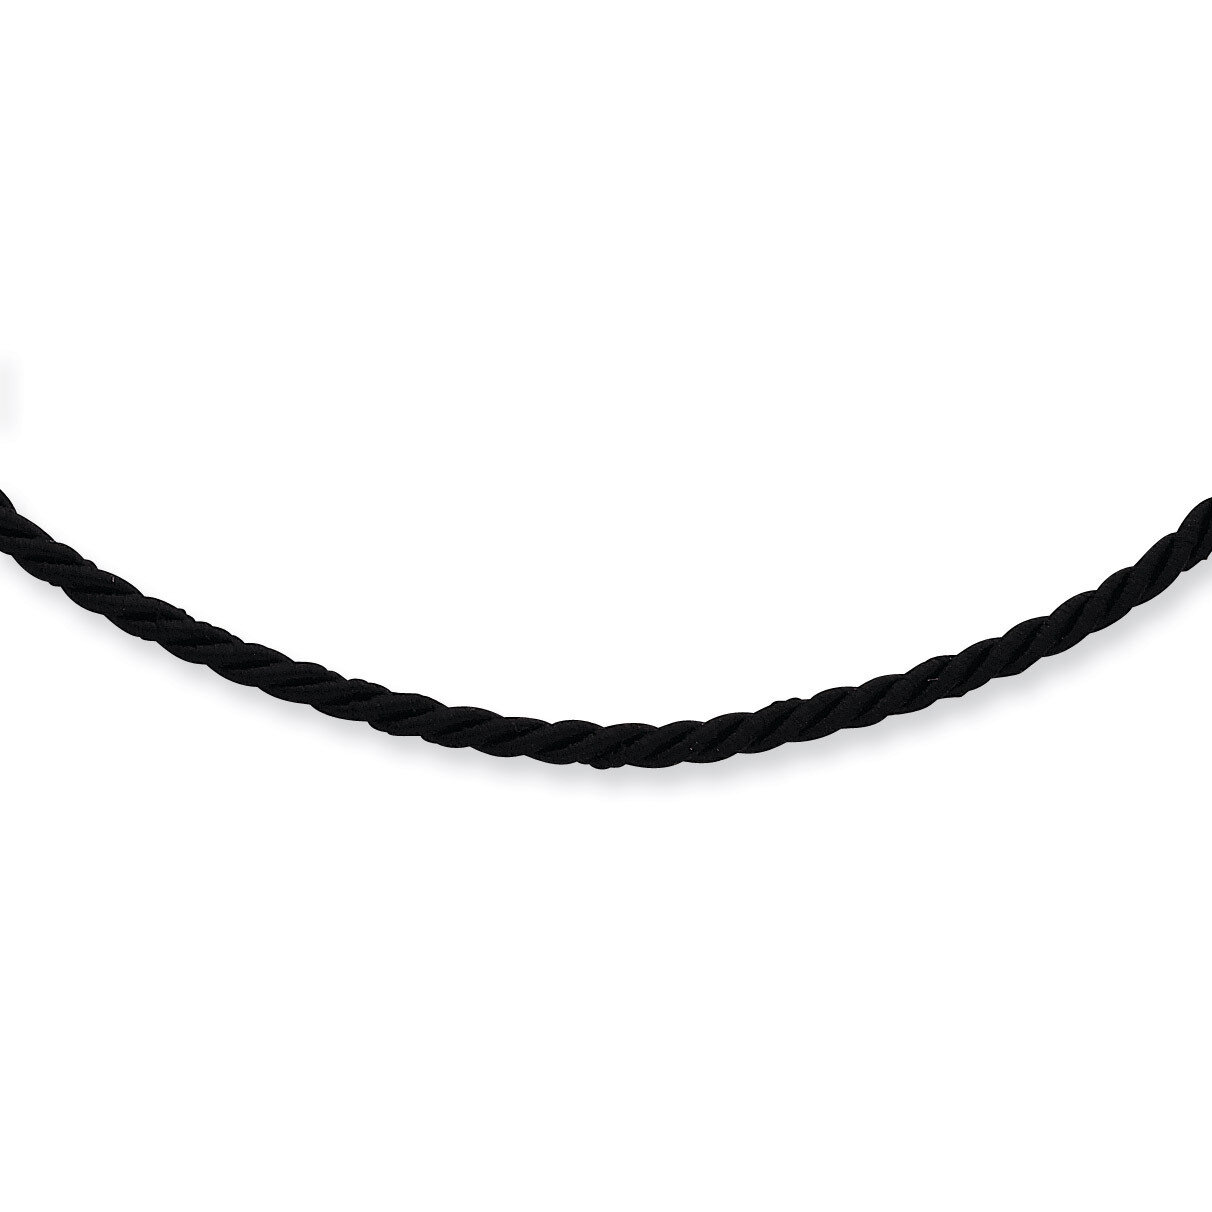 16 Inch Black Satin Cord Necklace Sterling Silver QK46-16